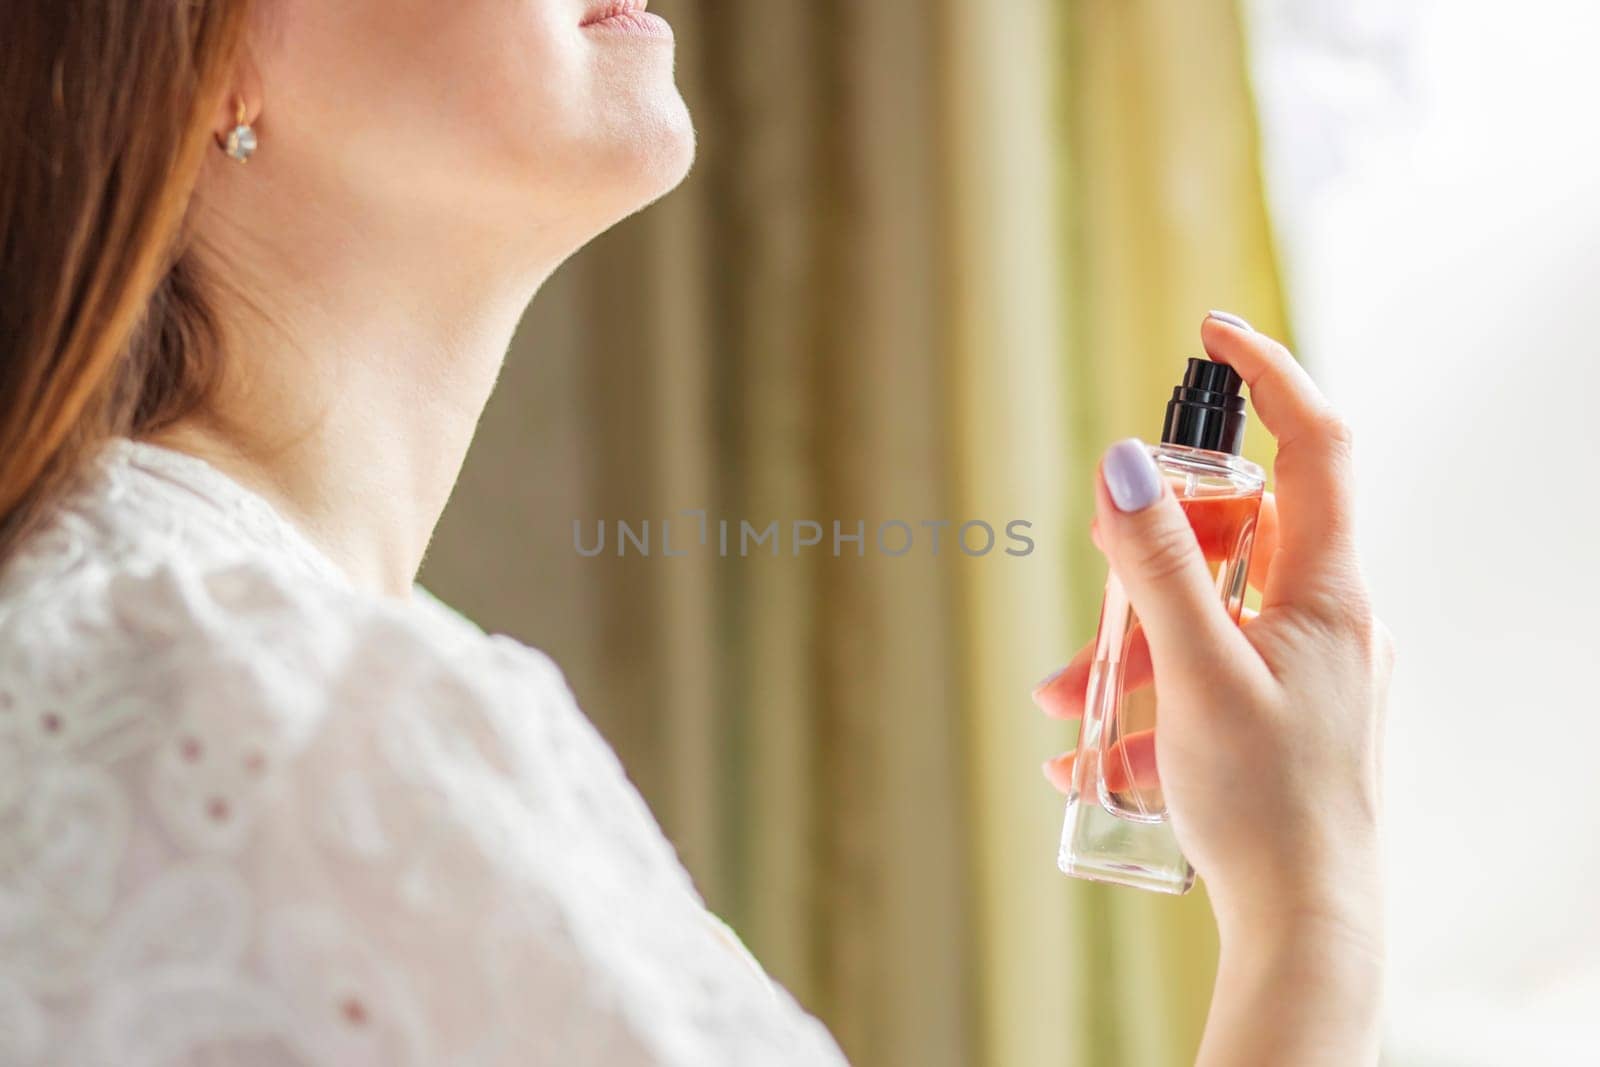 Woman in white blouse with eyes closed, enjoying the scent of a perfume bottle, evoking a sense of luxury and personal care